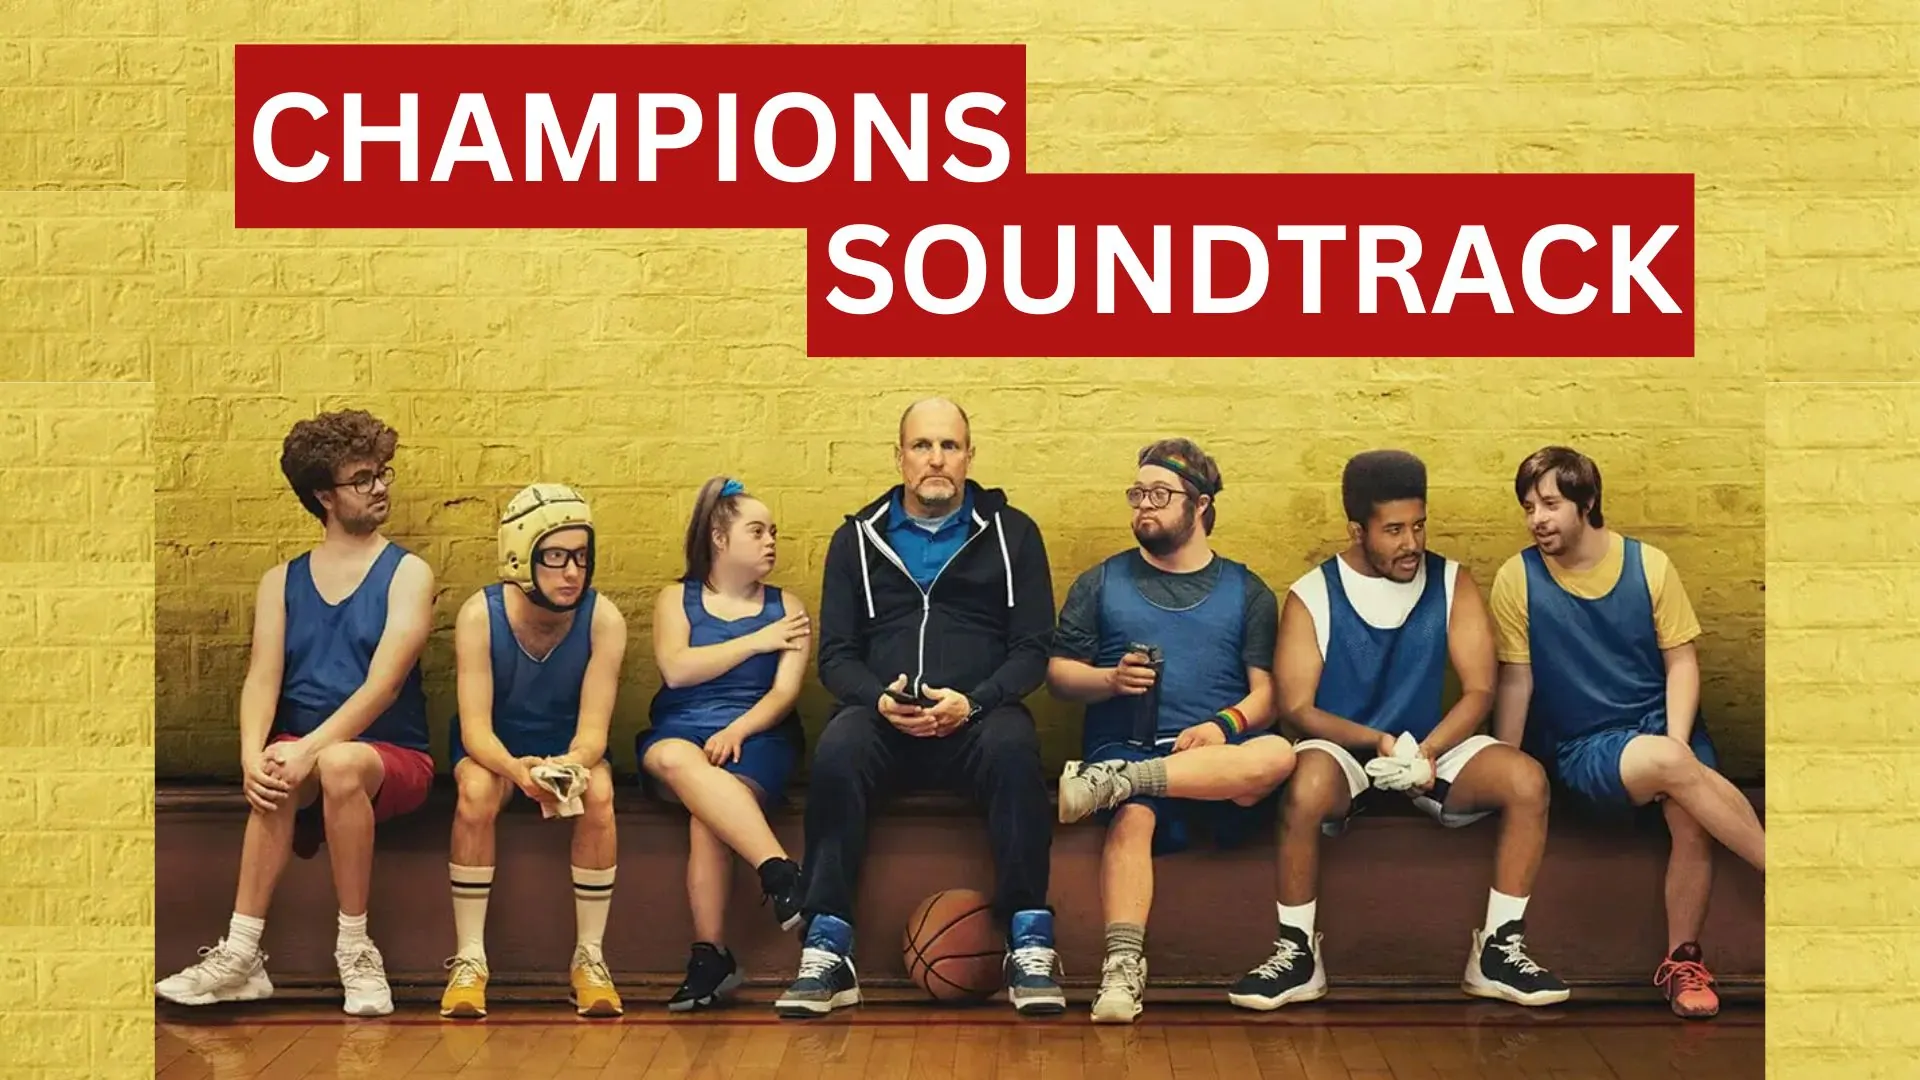 Movie Poster - The Champions Basketball